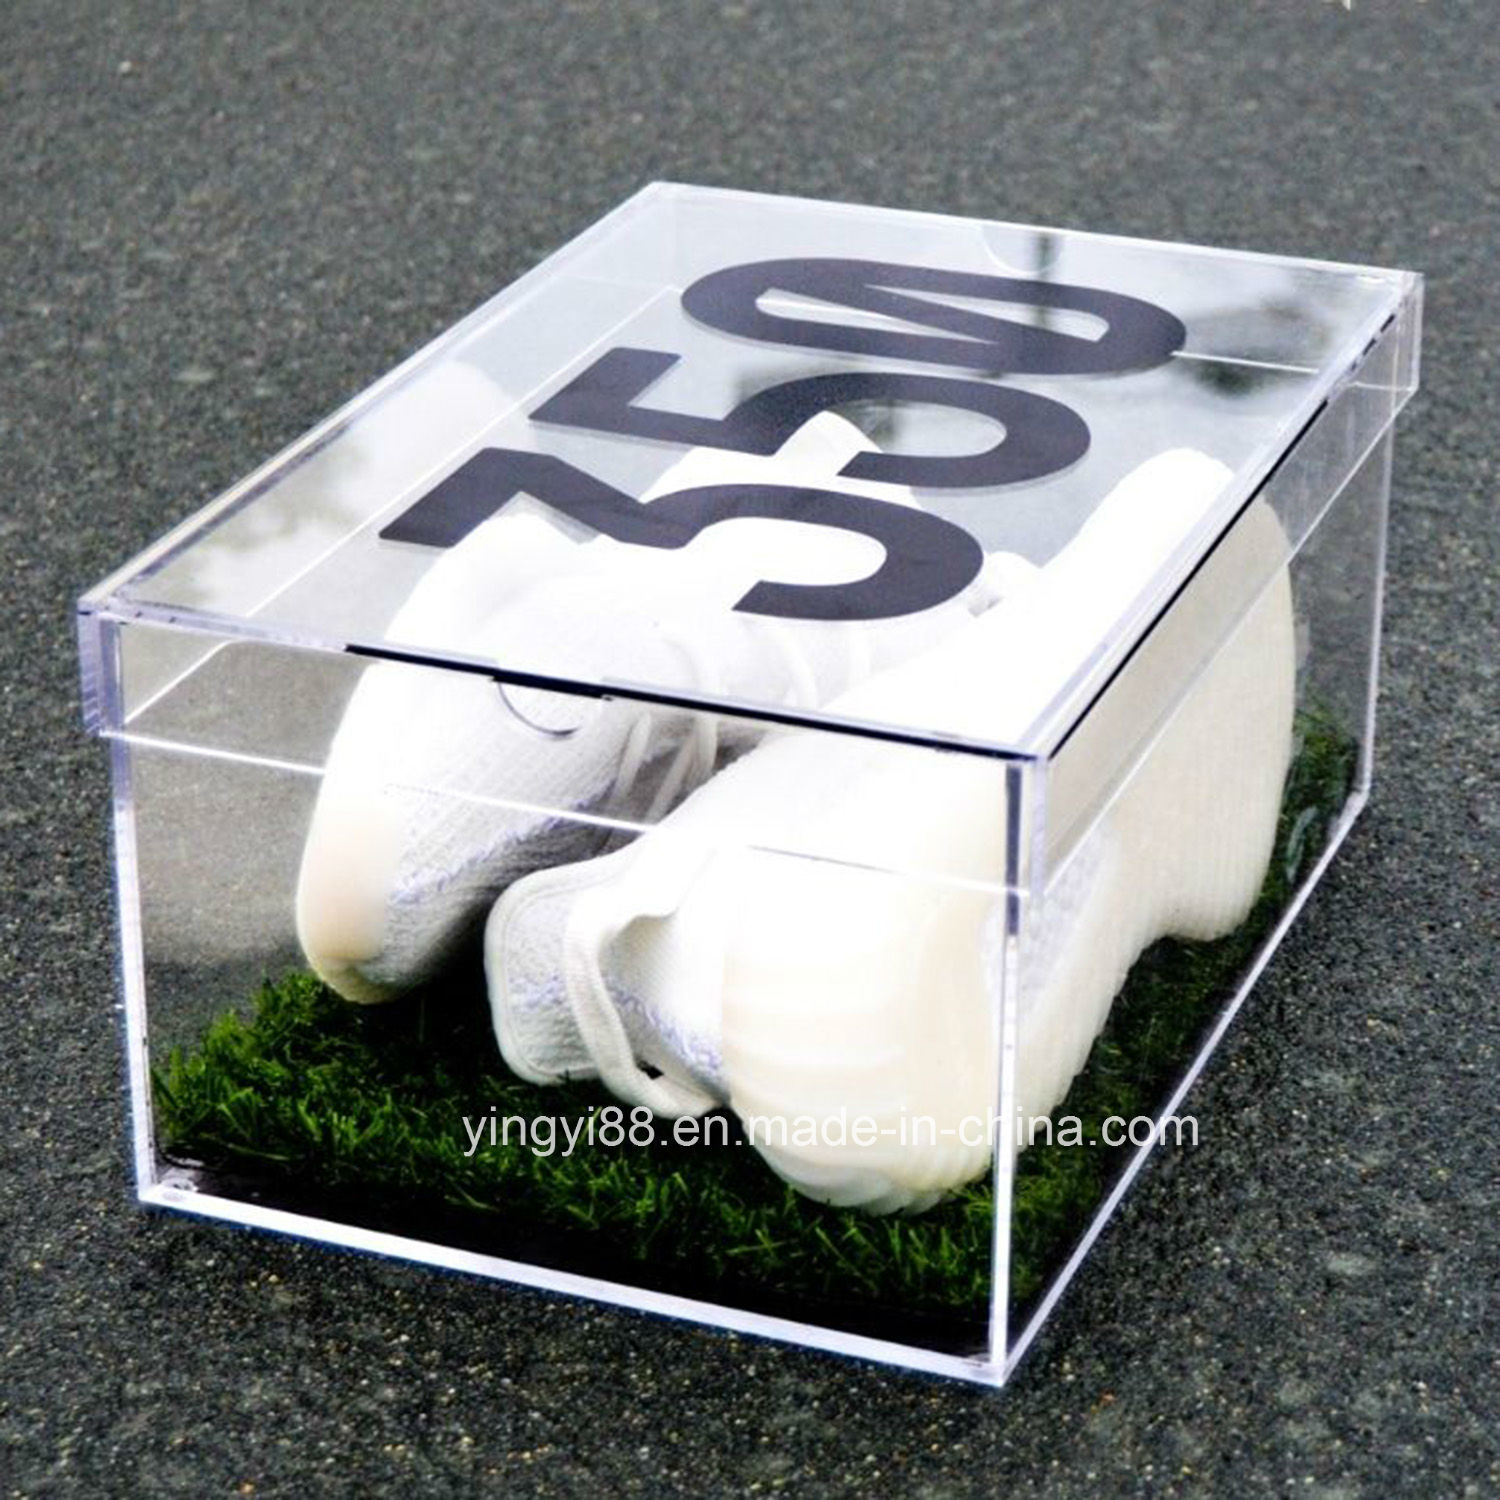 /proimages/2f0j00fNGTnrpaWQzt/large-crystal-clear-stackable-acrylic-shoe-display-box.jpg